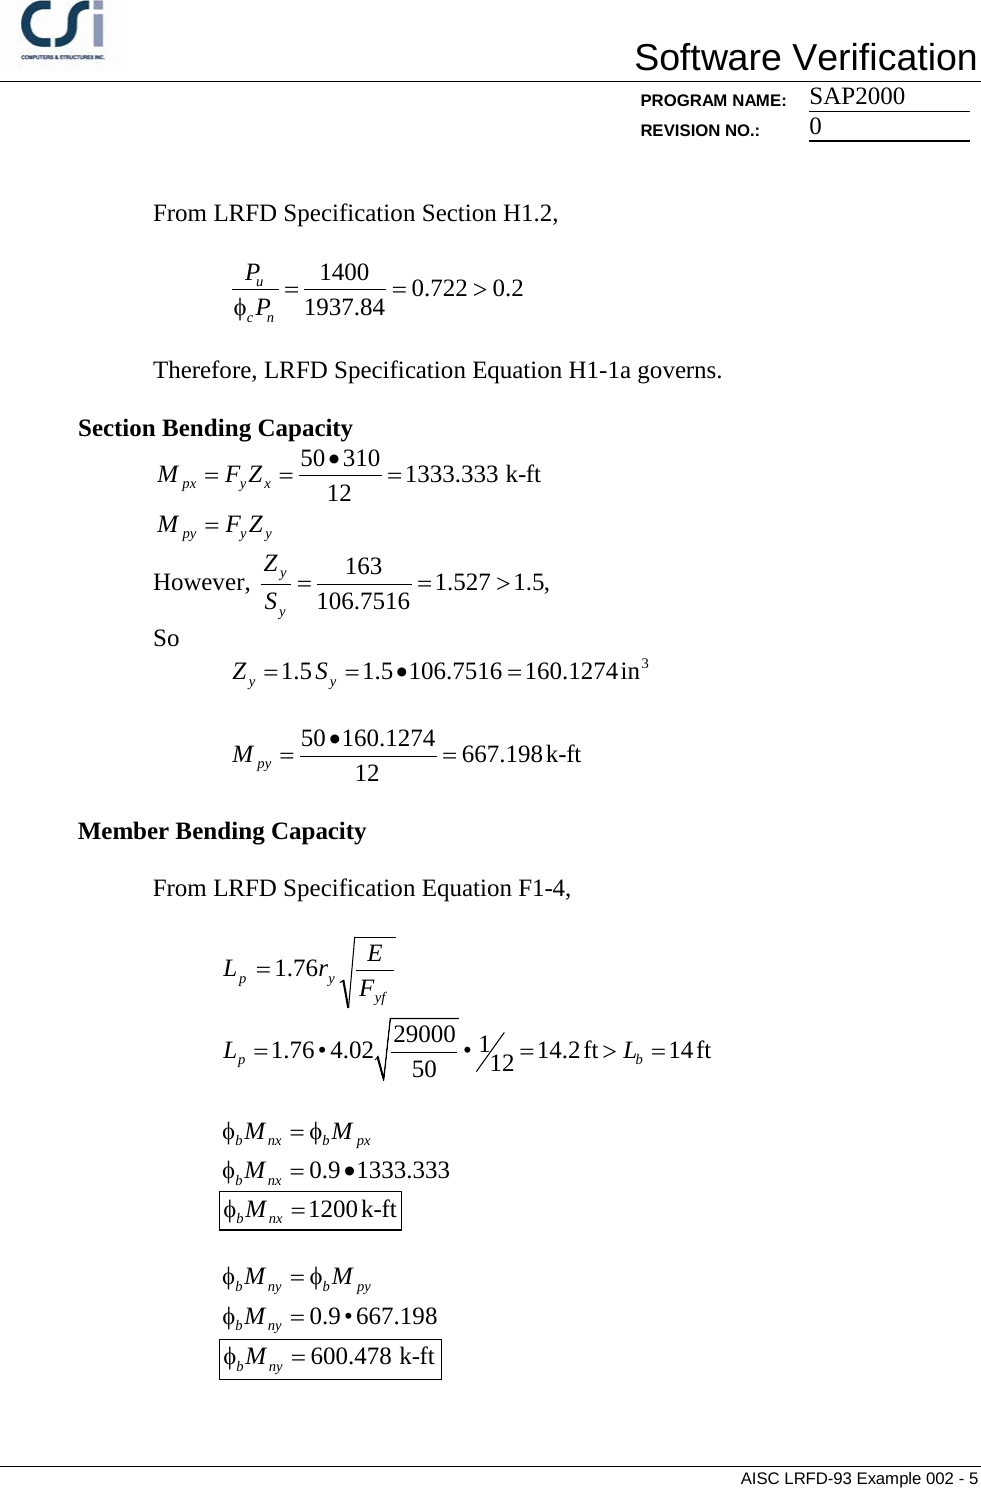 Page 5 of 7 - Contents AISC LRFD-93 Example 002